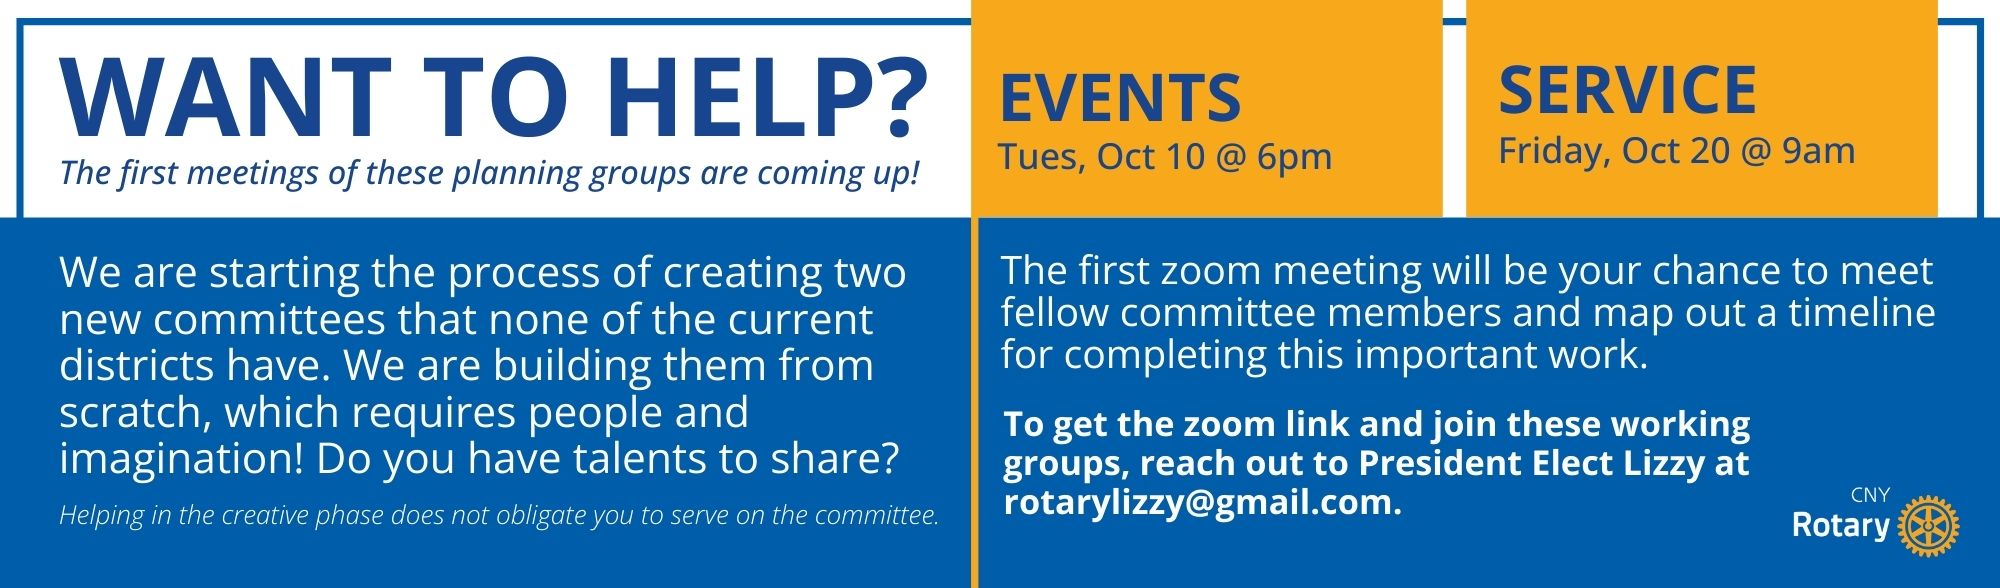 An invitation to CNY Rotary members to join kick off meetings to form the Events and Service committess with instructions to contact PE Lizzy for the zoom links.